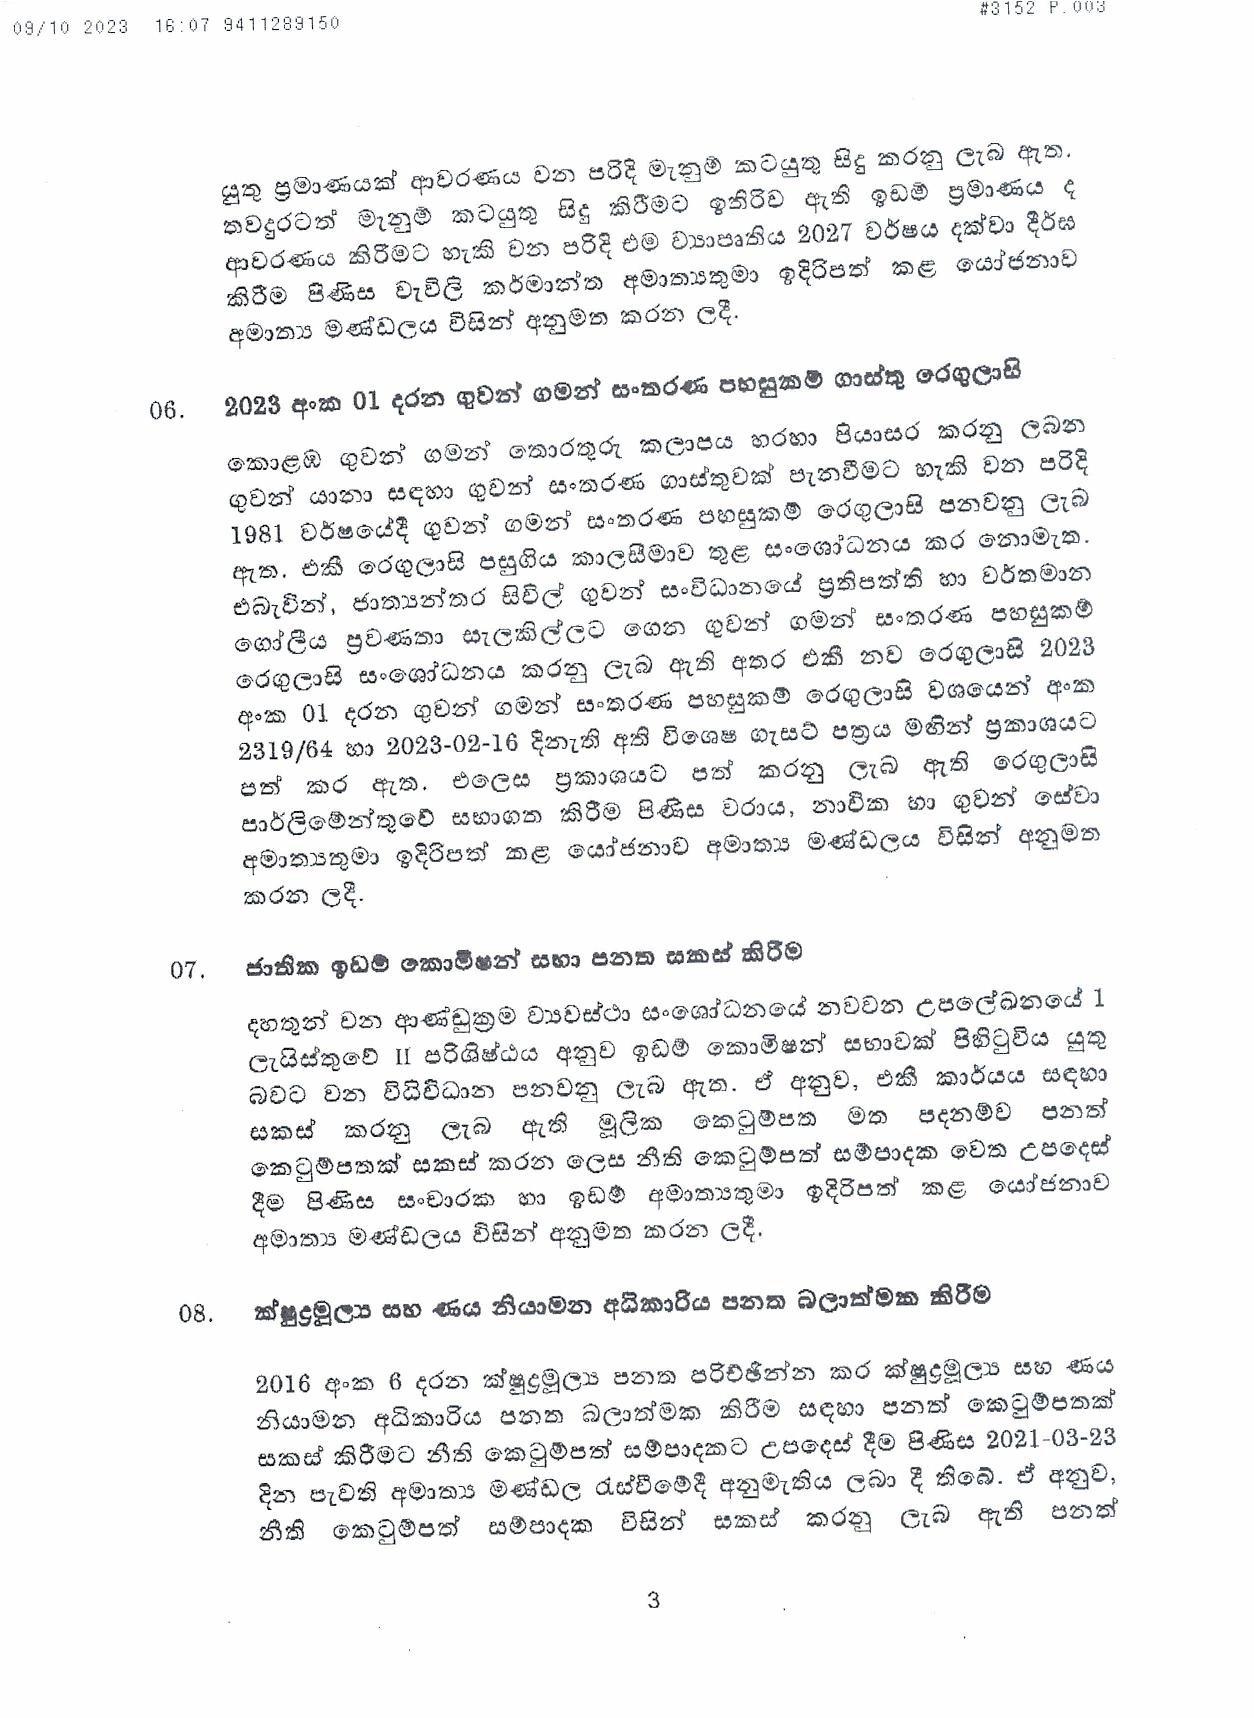 Cabinet Decision on 09.10.2023 page 003